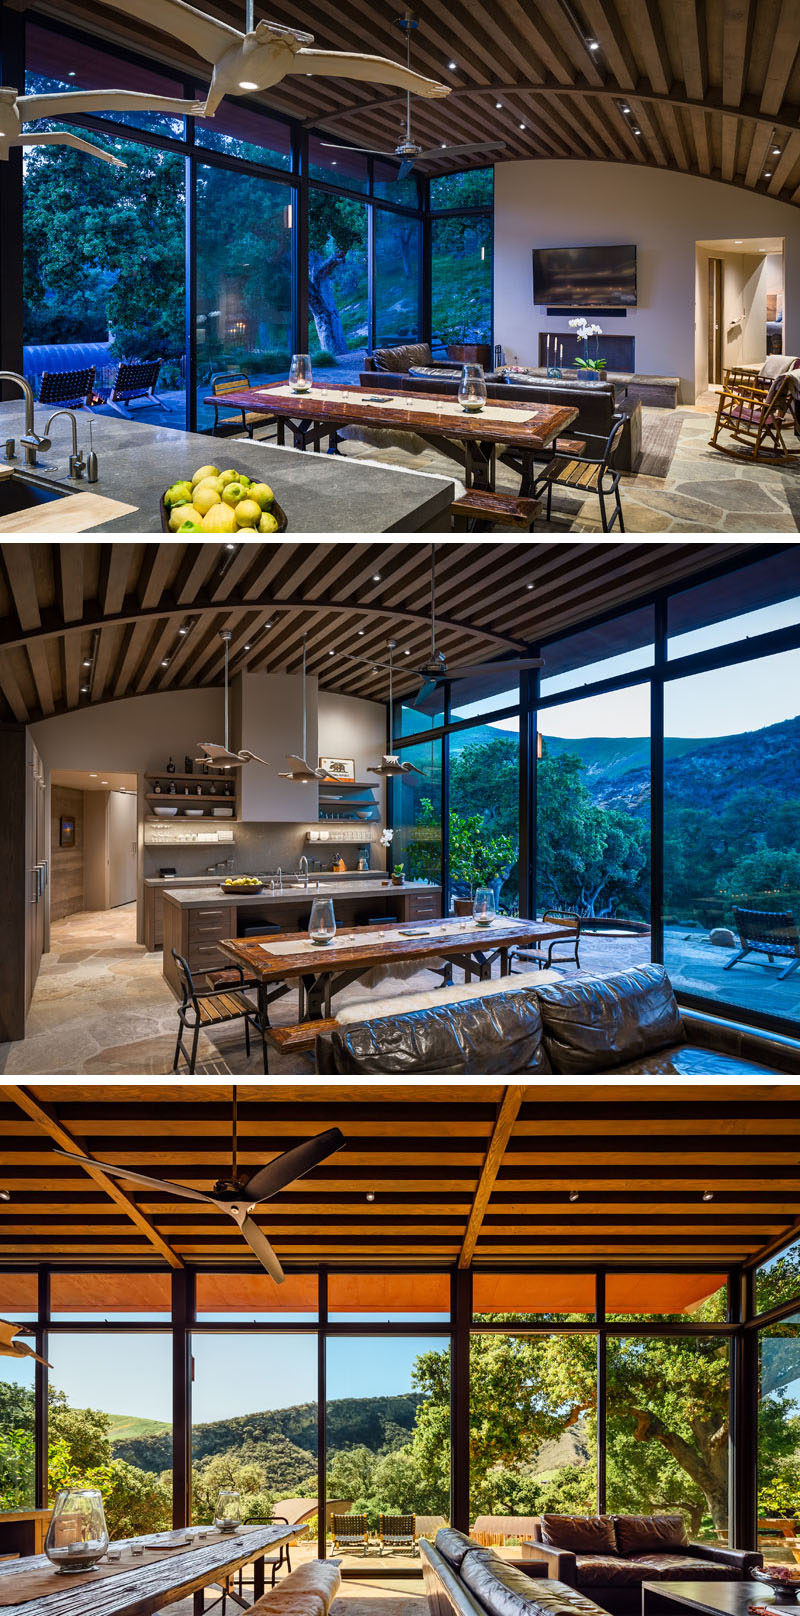 Inside this rustic modern house, Douglas fir beam ceilings draw your eye to the curved ceiling, while the living room, dining room and kitchen all share the same open space. Large windows and sliding doors look out to the valley, and open up to the patio outside. #CurvedCeiling #OpenPlan #InteriorDesign